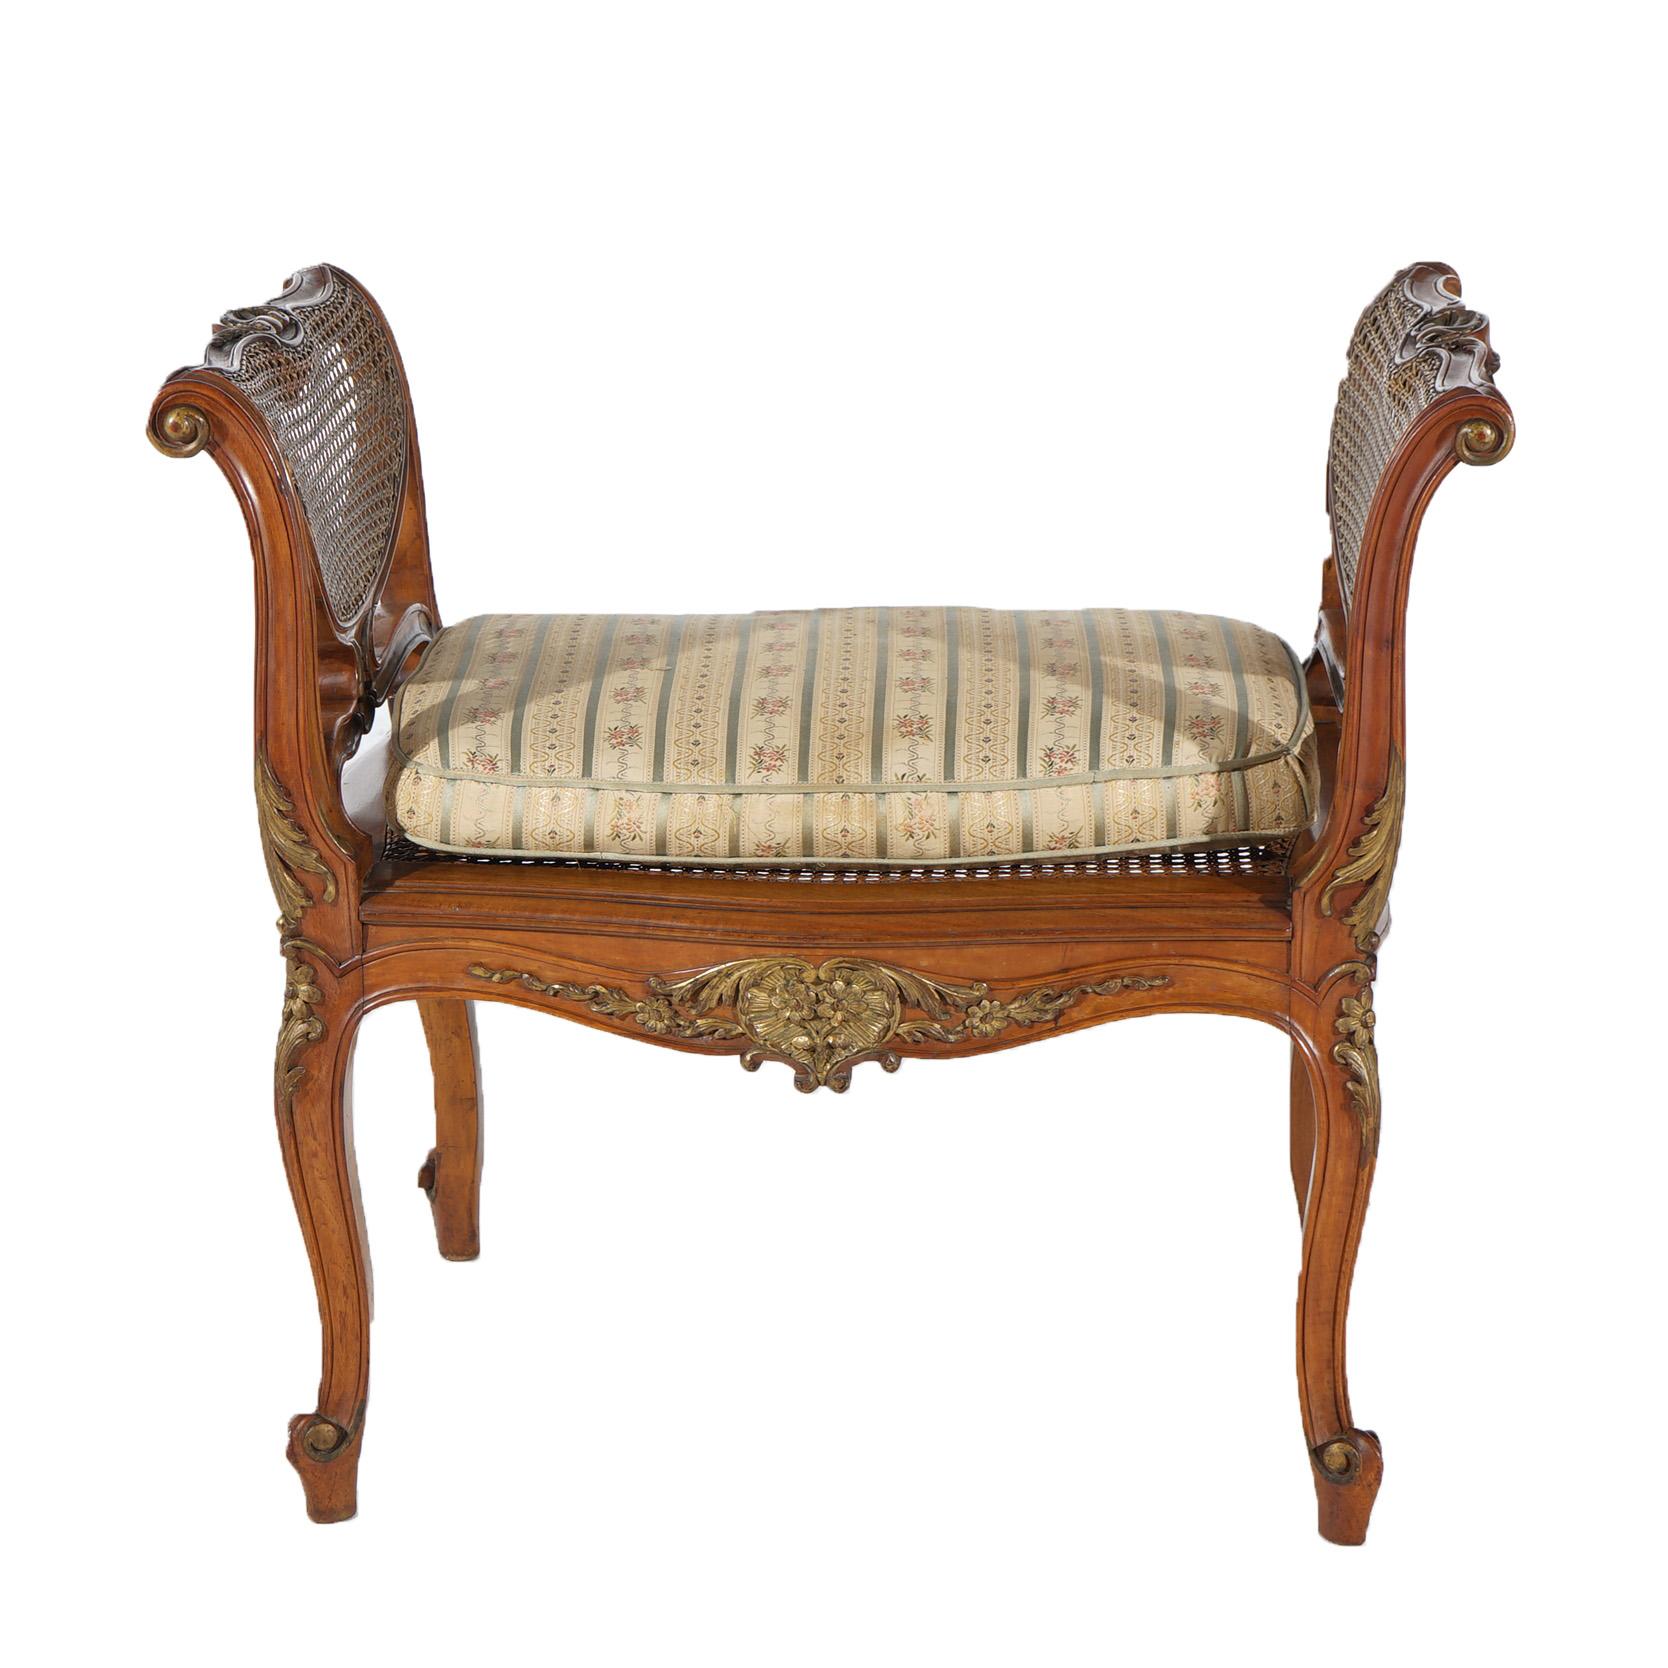 20th Century Antique French Louis XIV Style Upholstered Walnut & Cane Window Bench Seat C1900